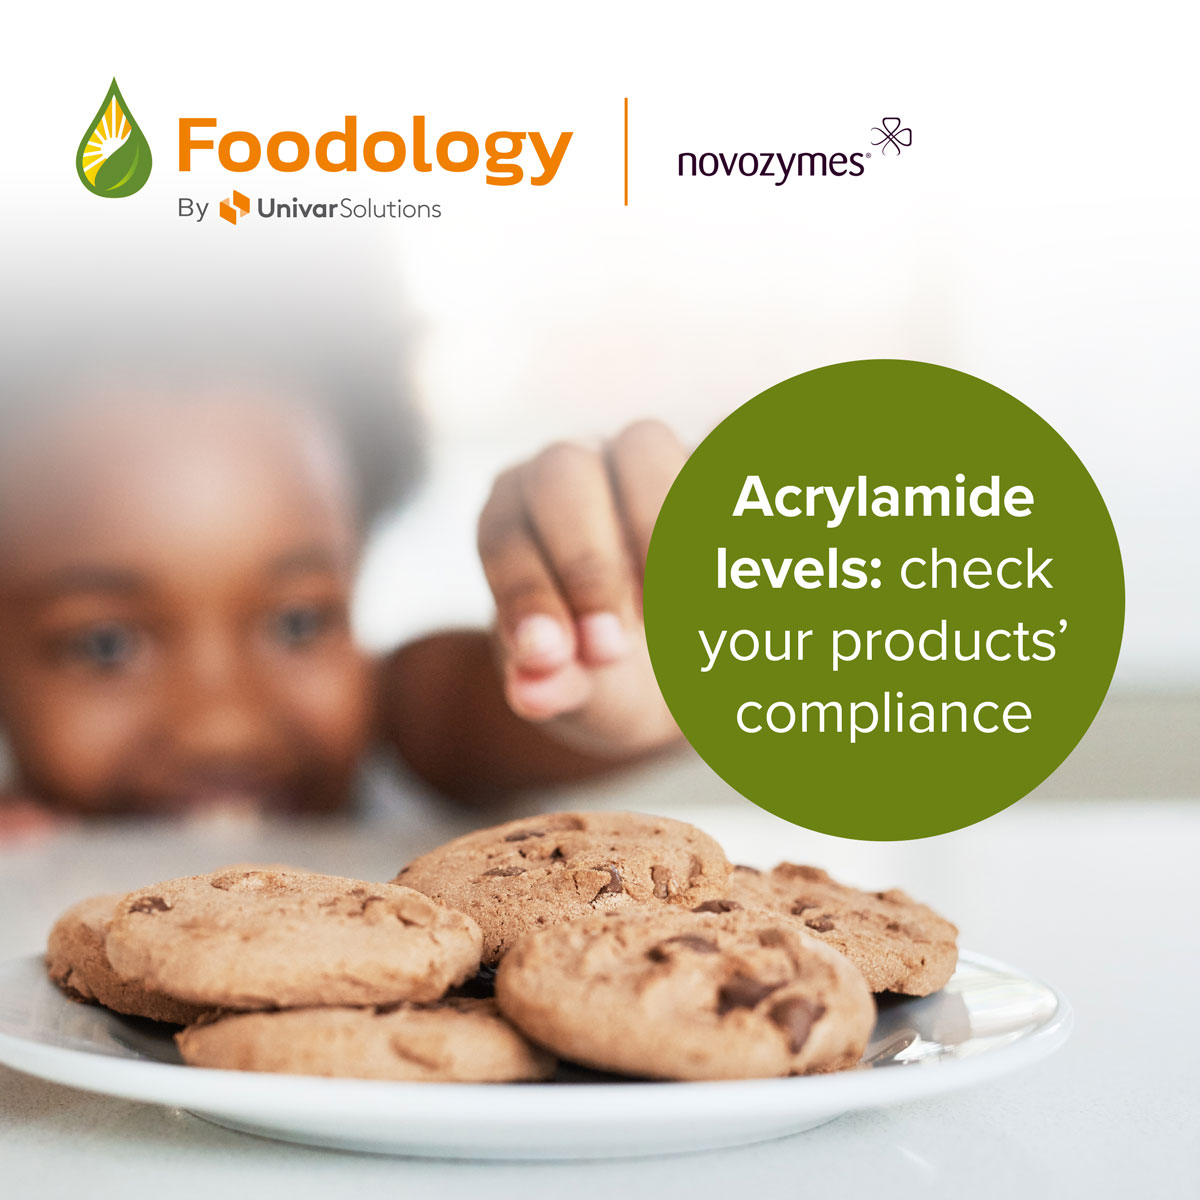 Check your products Acrylamide level compliance